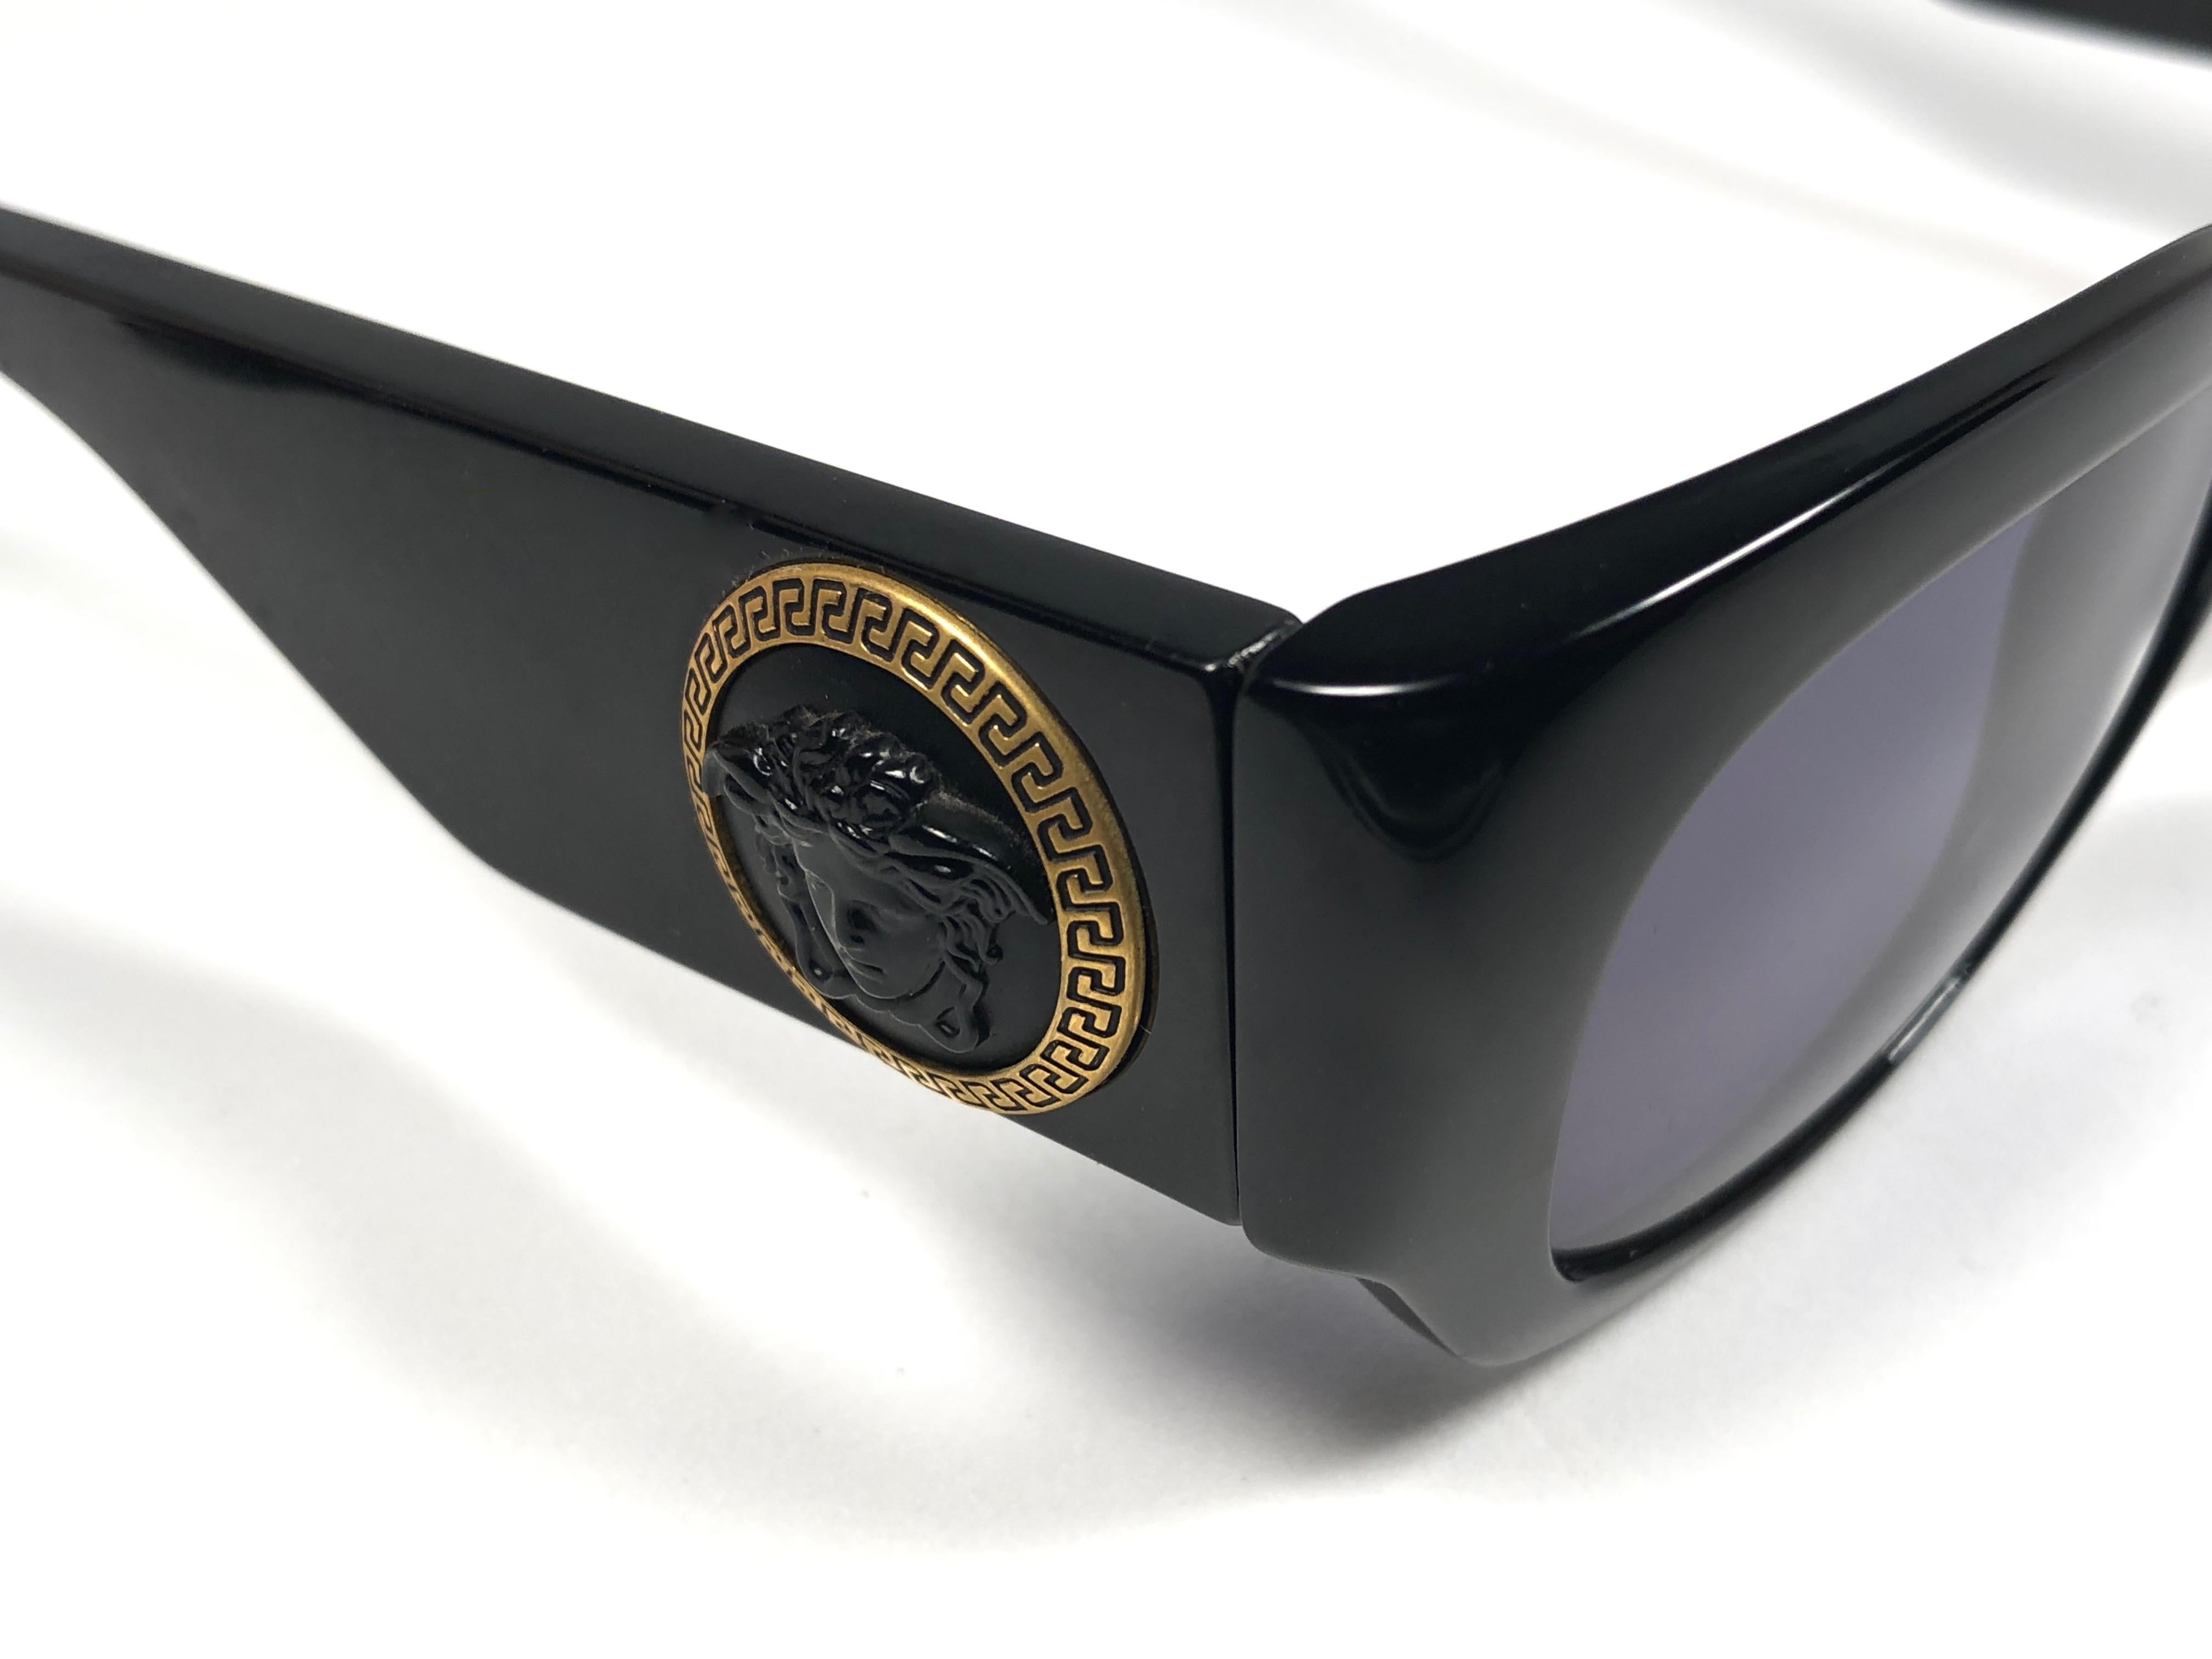 New Vintage Gianni Versace 420 E Sleek Black Sunglasses 1990's Made in Italy 3